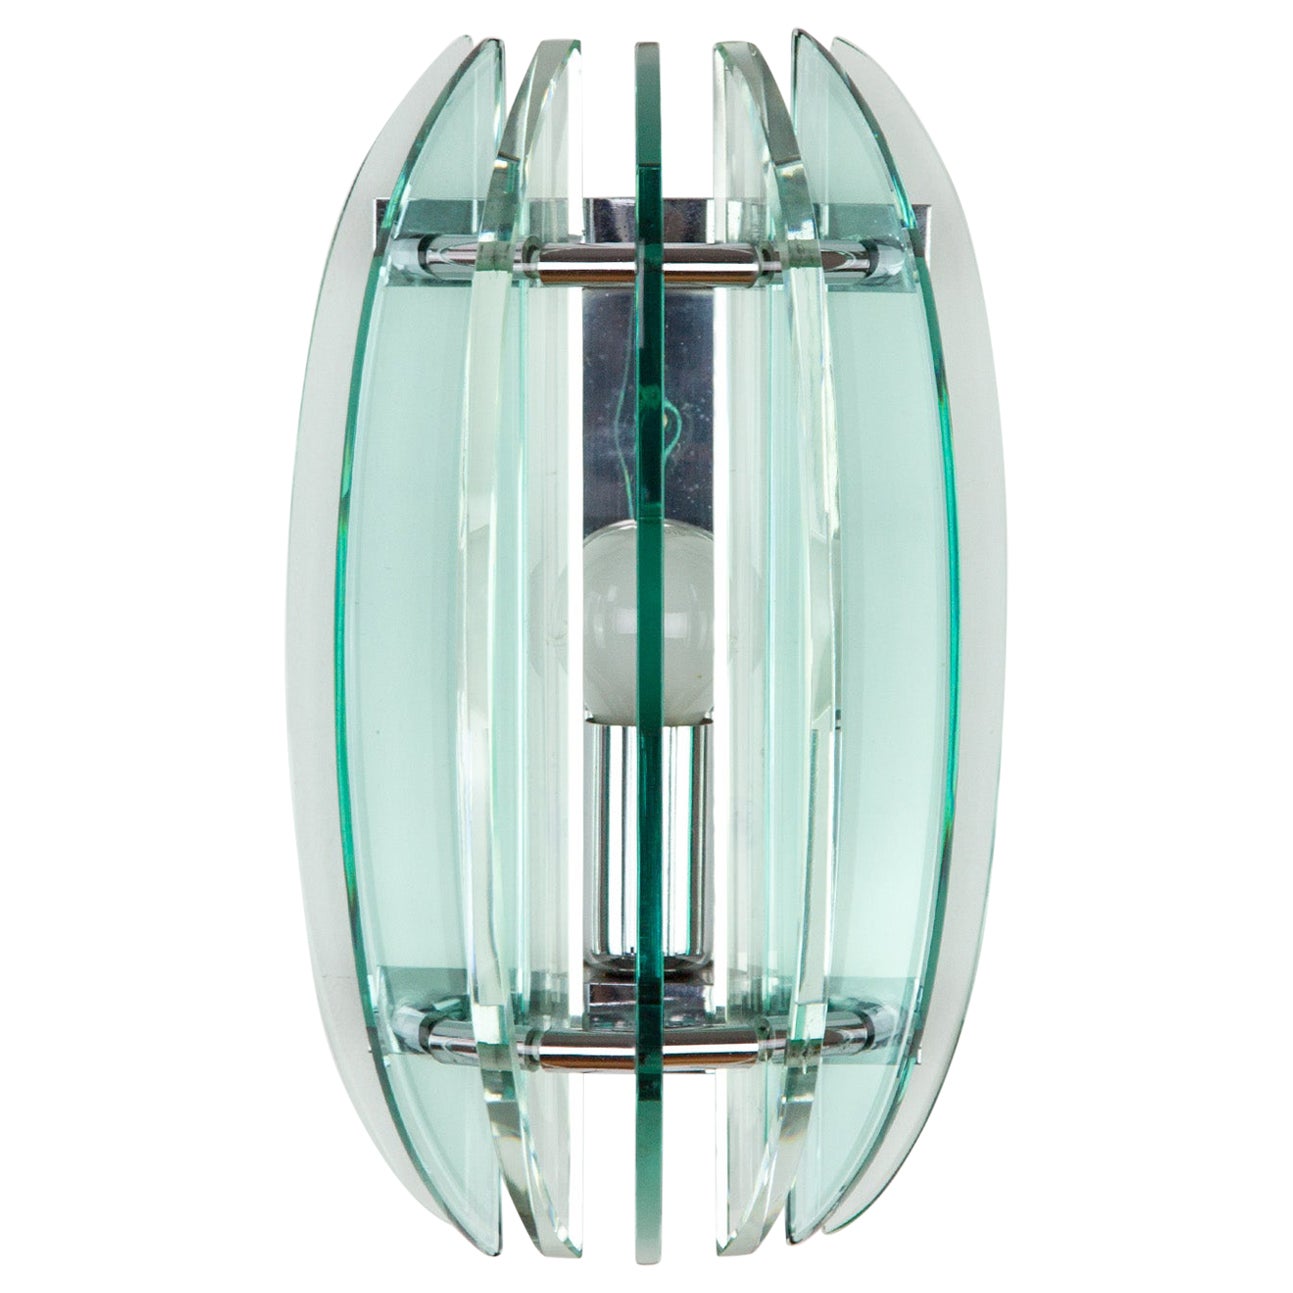 Lovely Italian wall light in pale green and clear glass by Veca. Held by a chrome metal bracket in a circular pattern with one light socket. The light colored glass emits a soft and vibrant hue. The light colors give the sconce a lightness and